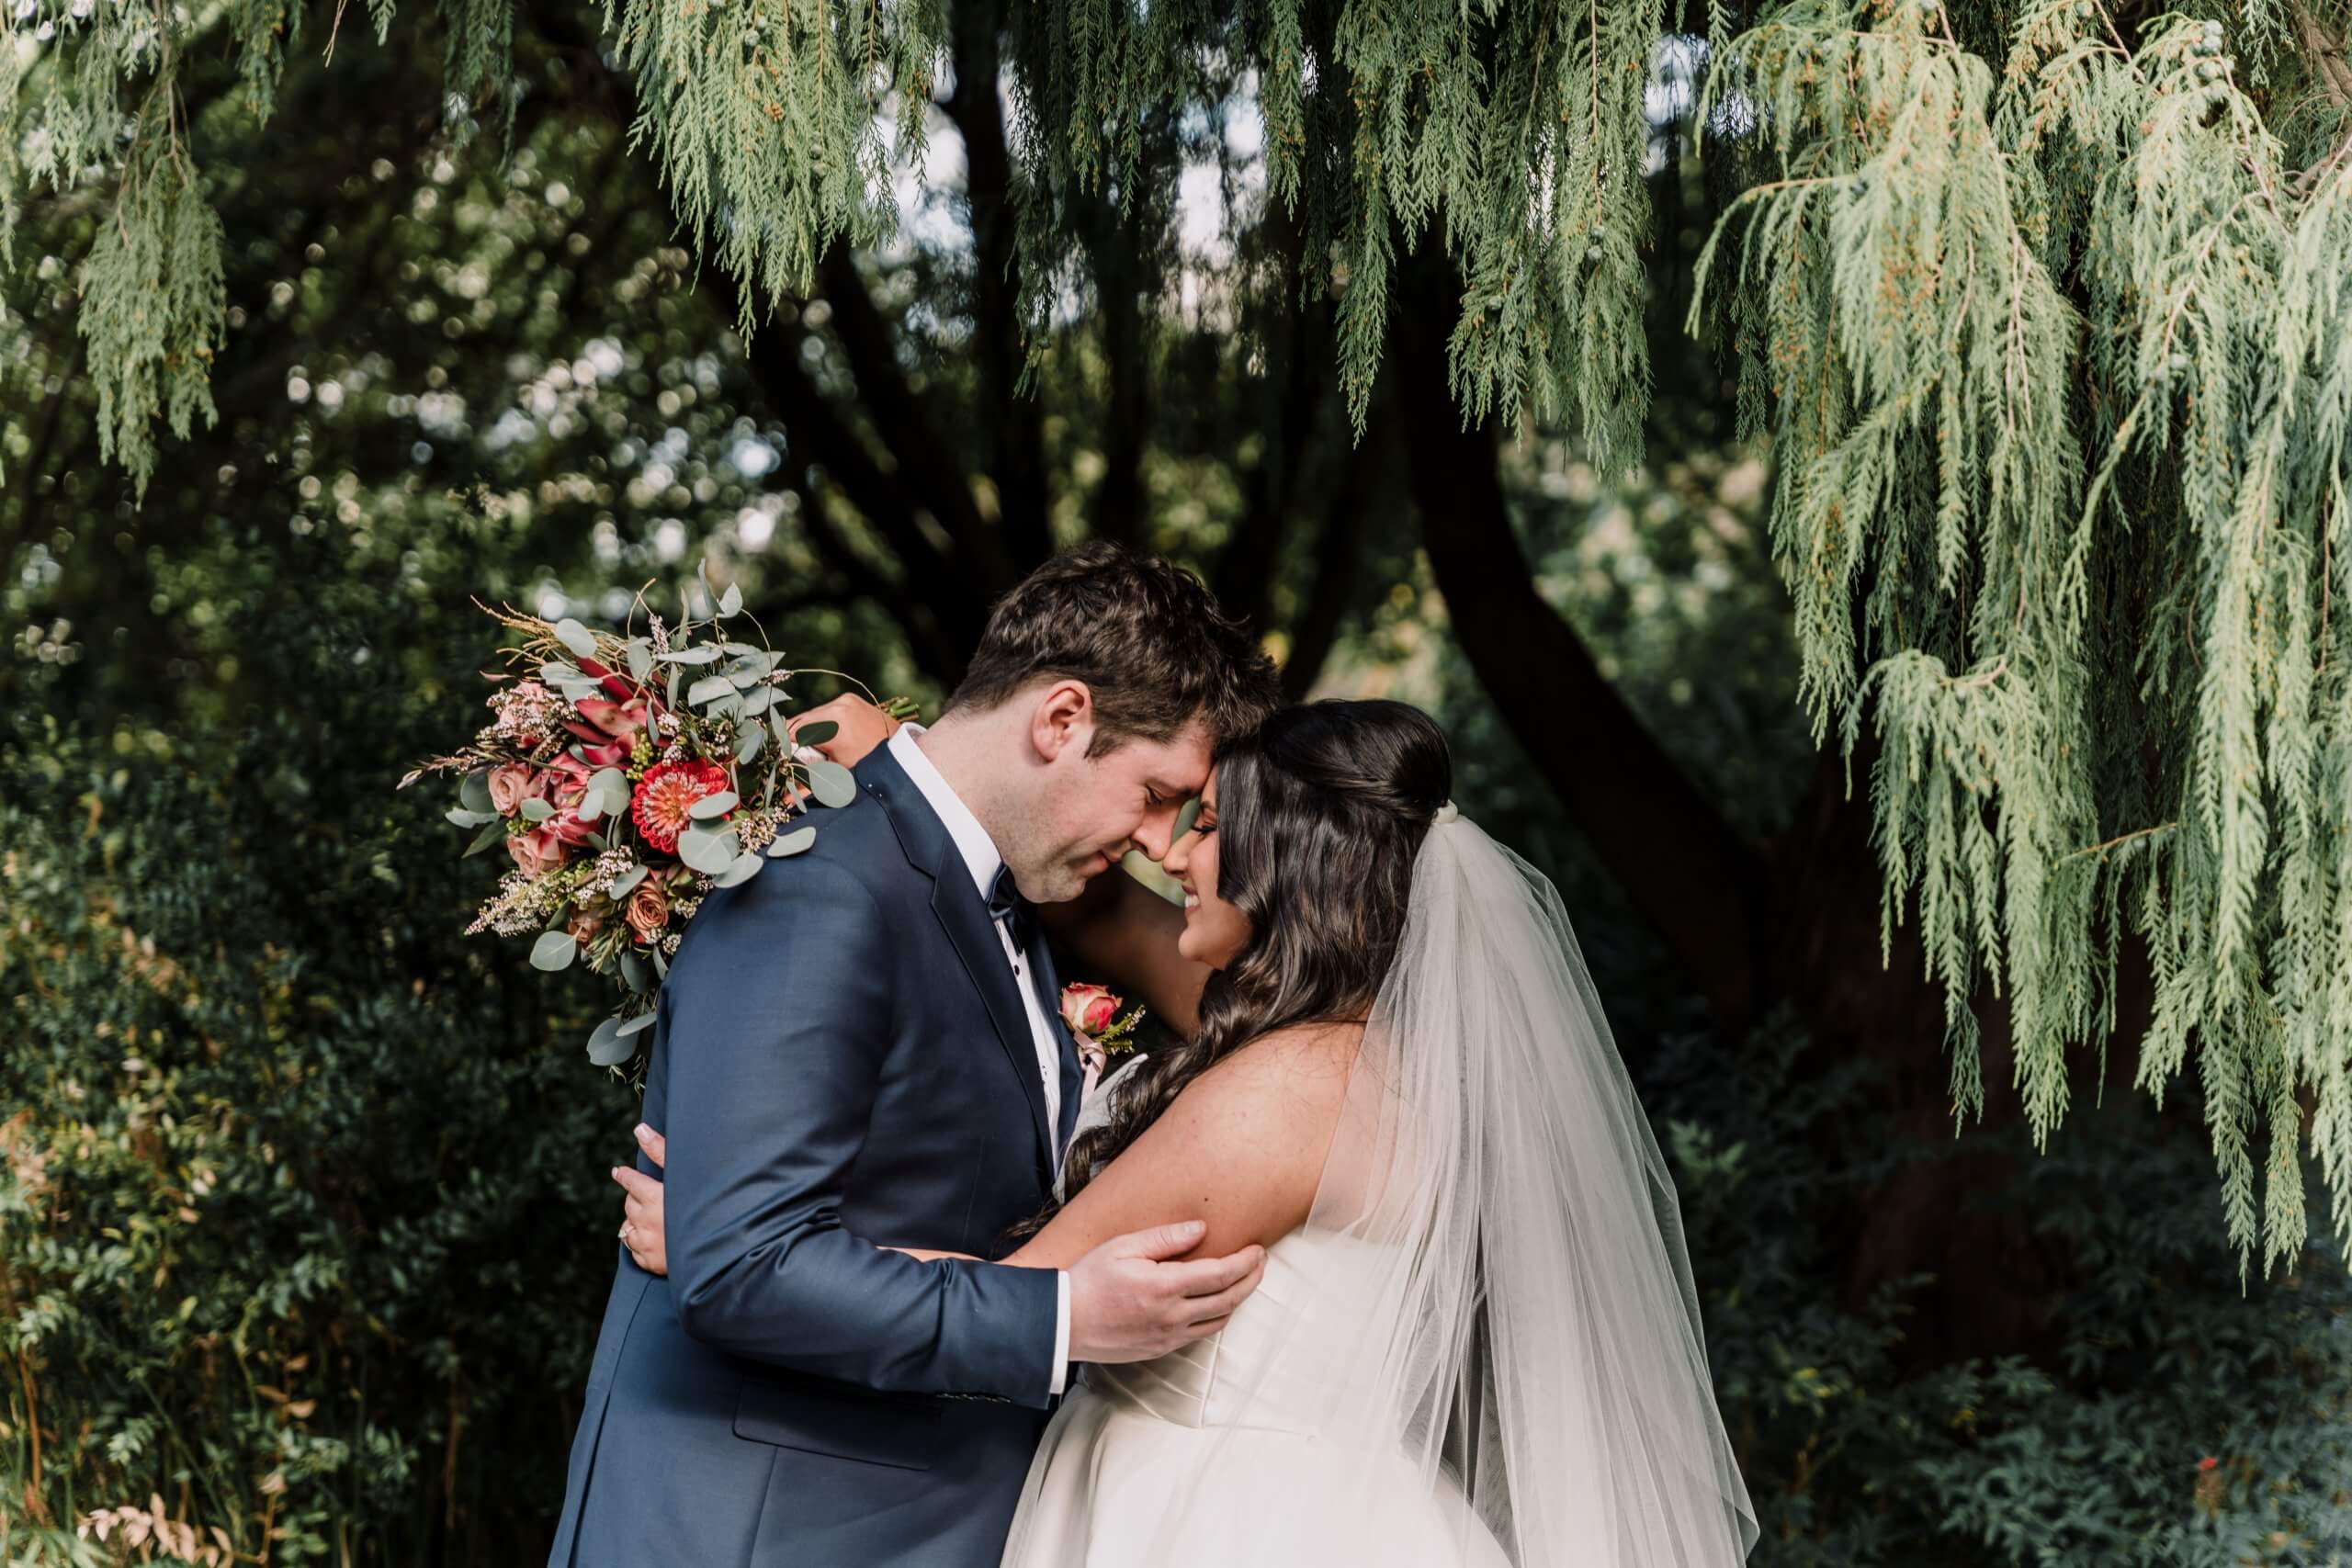 Nose to nose, arm in arm - the bride and groom embraces each other while they are surrounded by greenery.